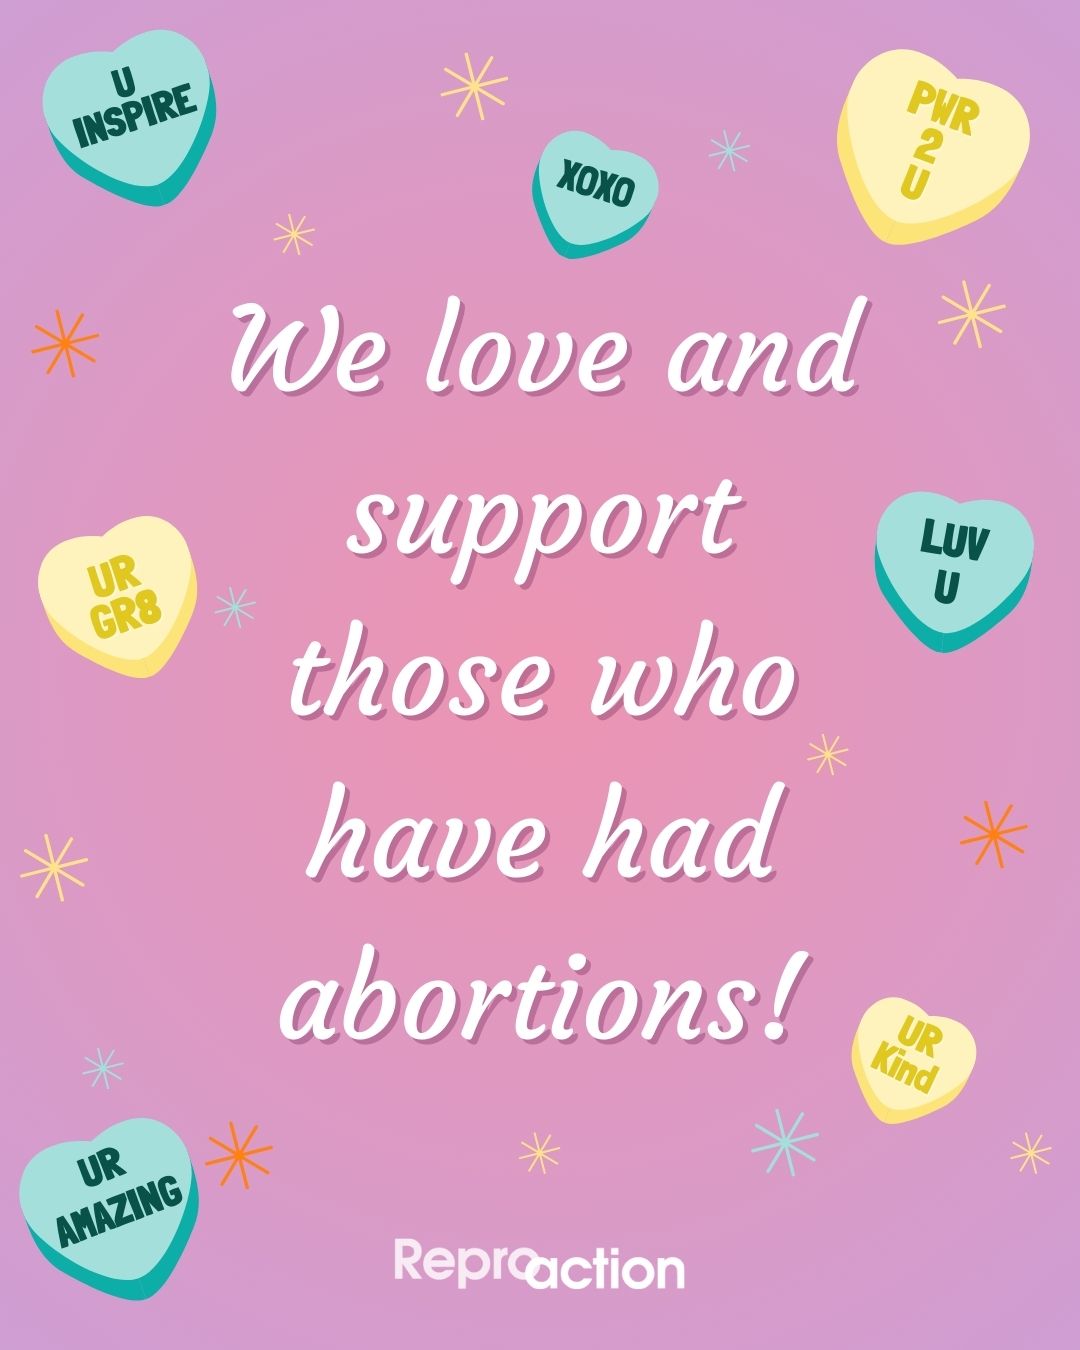 A pink and purple background with candy hearts on it reads “We love and support those who have had abortions."